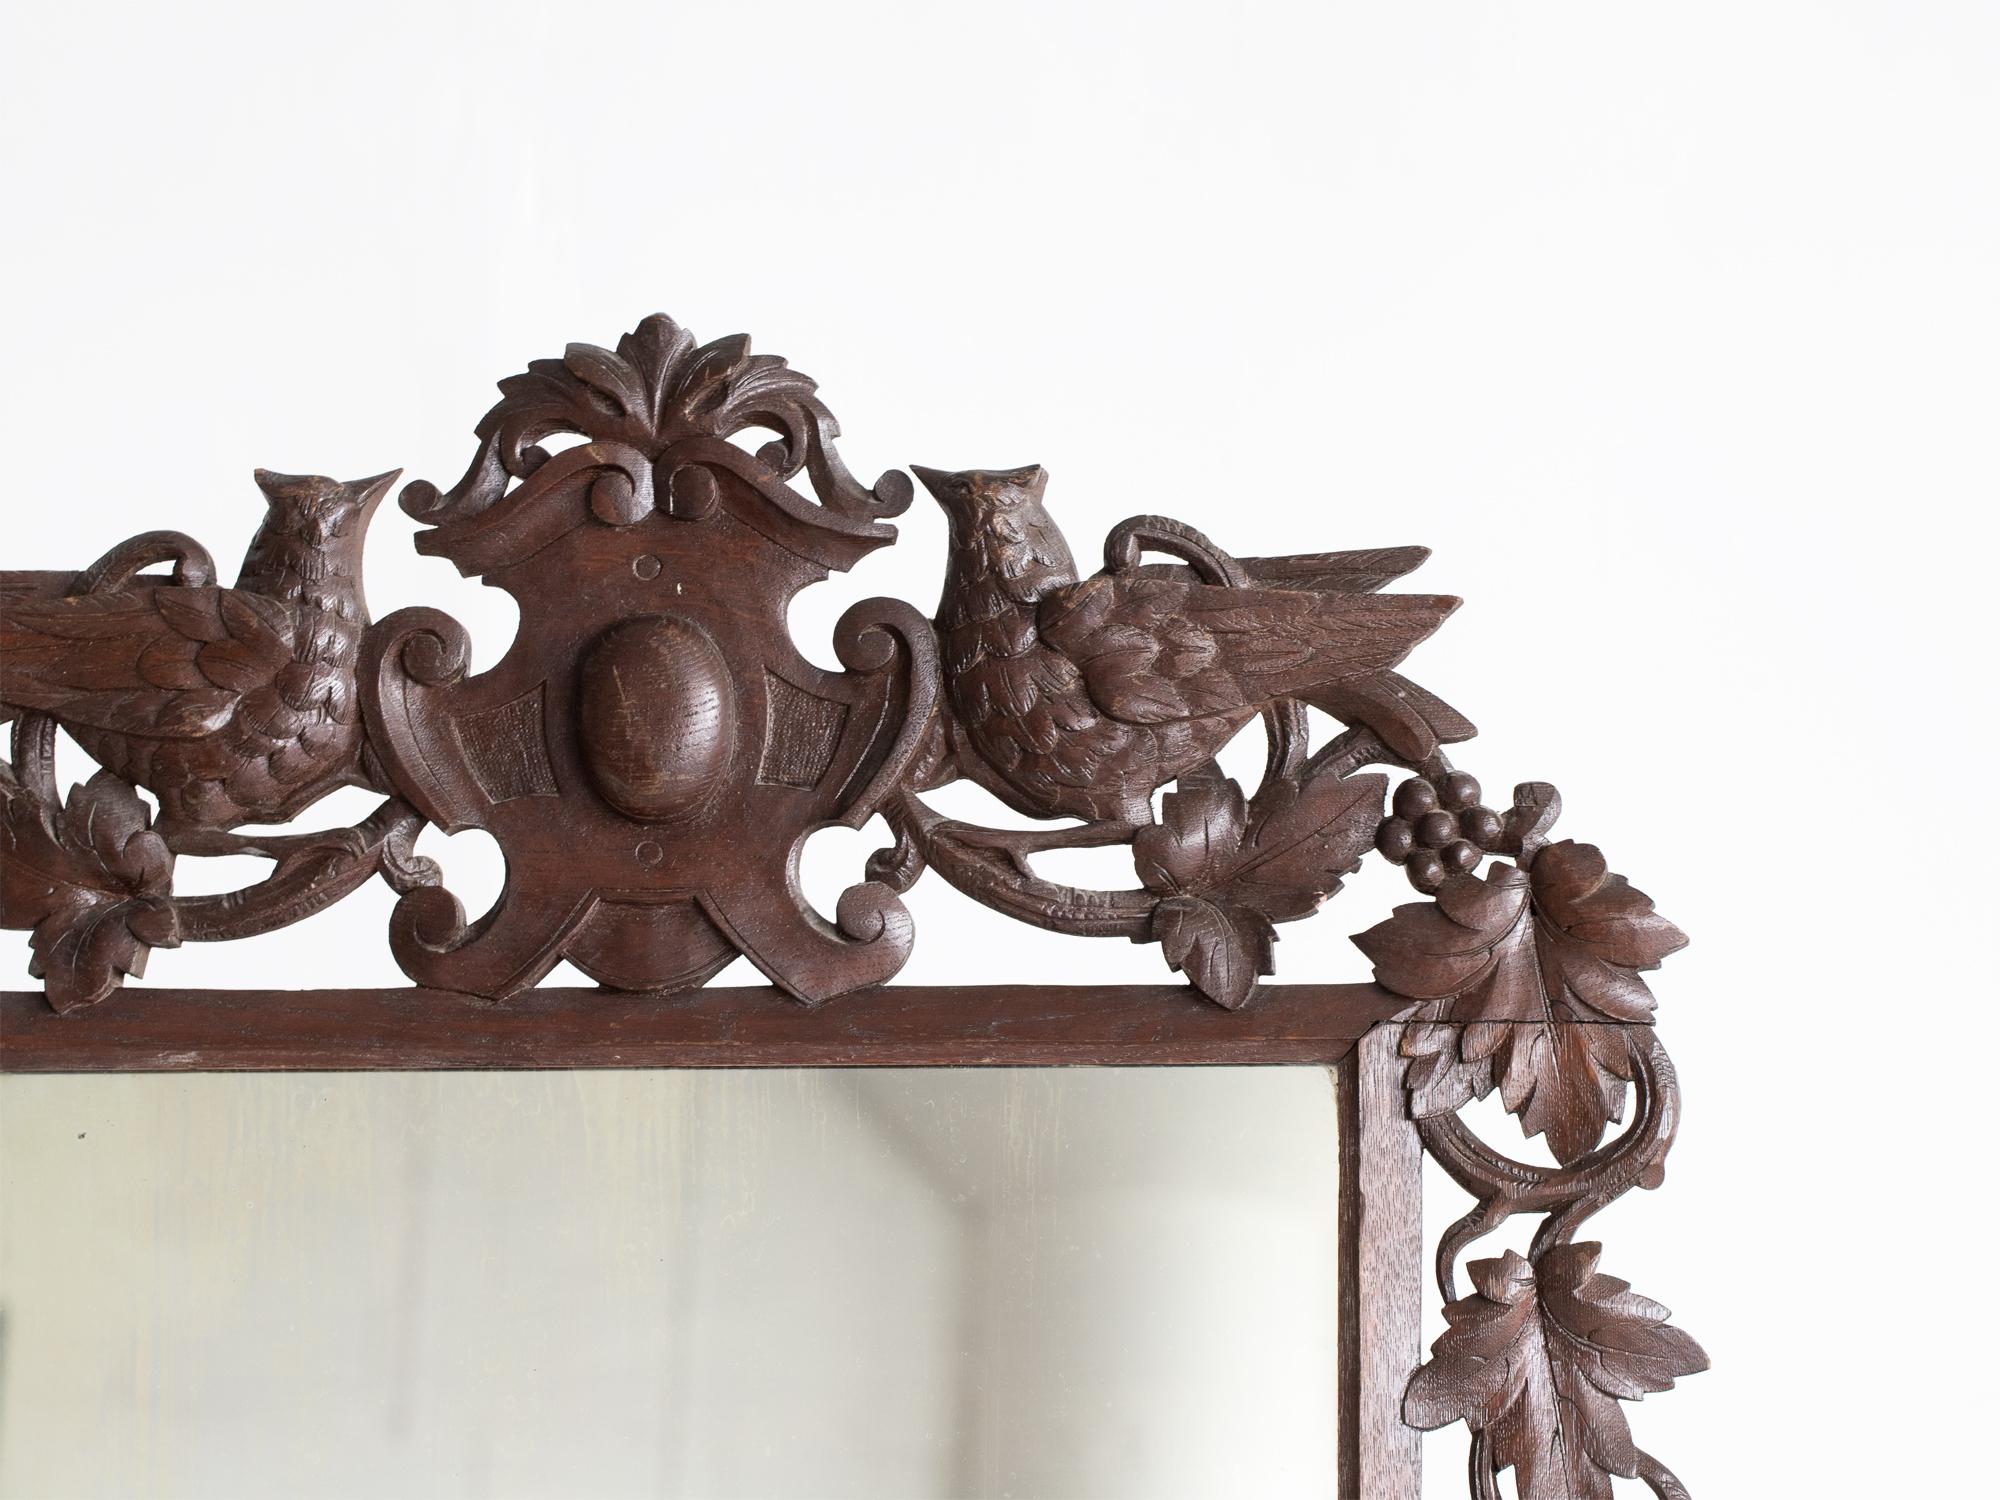 A large Black Forest overmantle or wall mirror. Germany, 19C.

Patinated oak frame with opposing cuckoos and foliate carvings, retaining its original plate.

110 x 74 cm

43.3 x 29.1 “